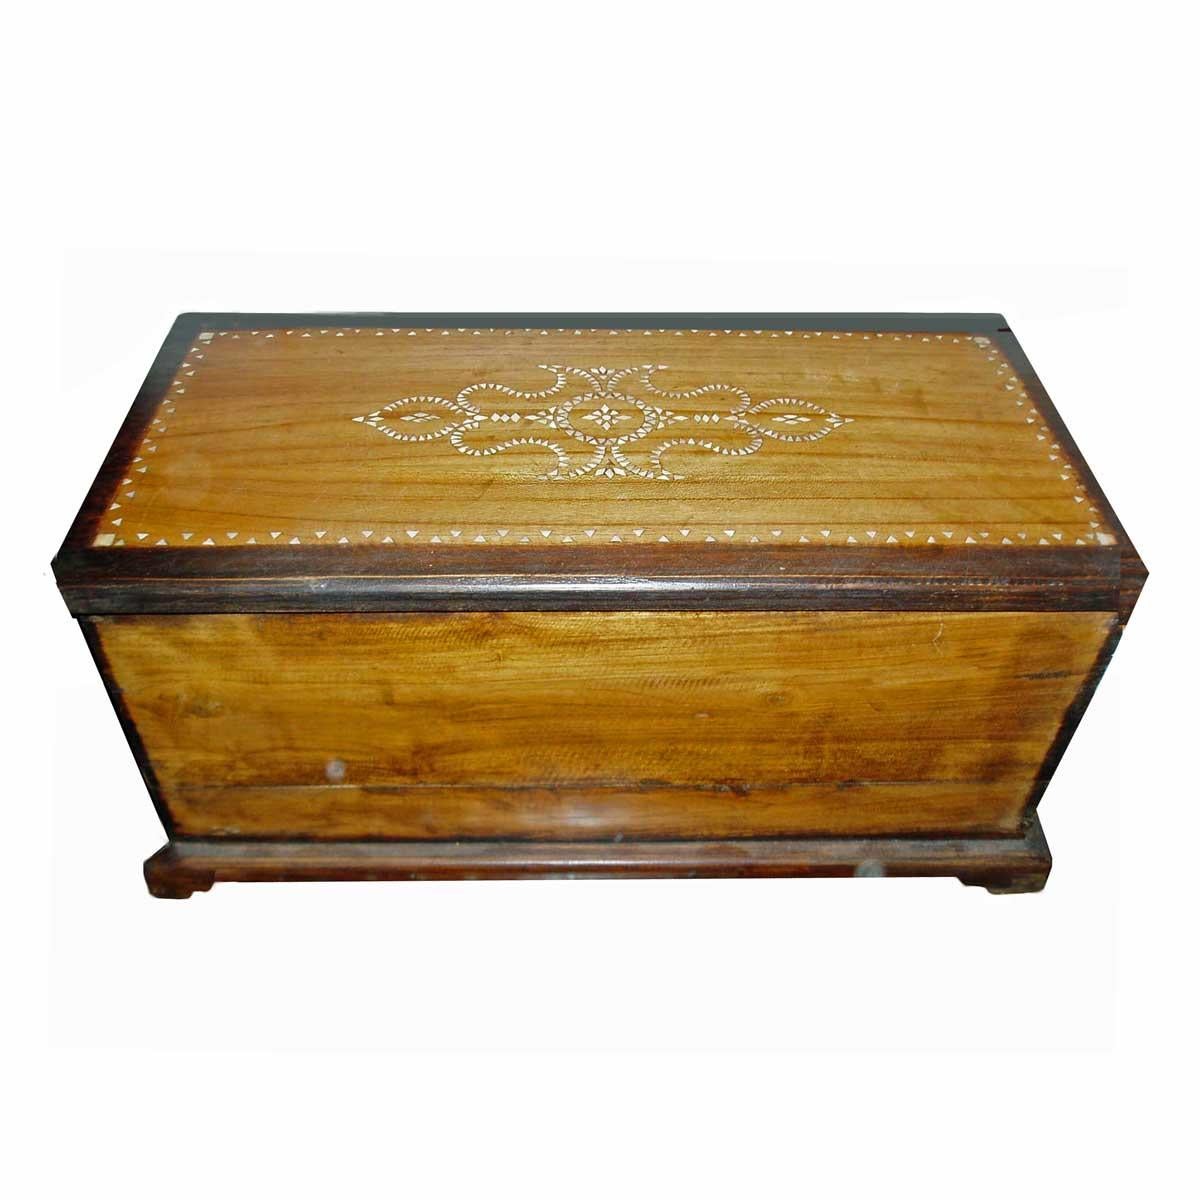 A delicately inlaid trunk from Indonesia, in two-tone wood. Mother of pearl insets on top and sides. Early 20th century.